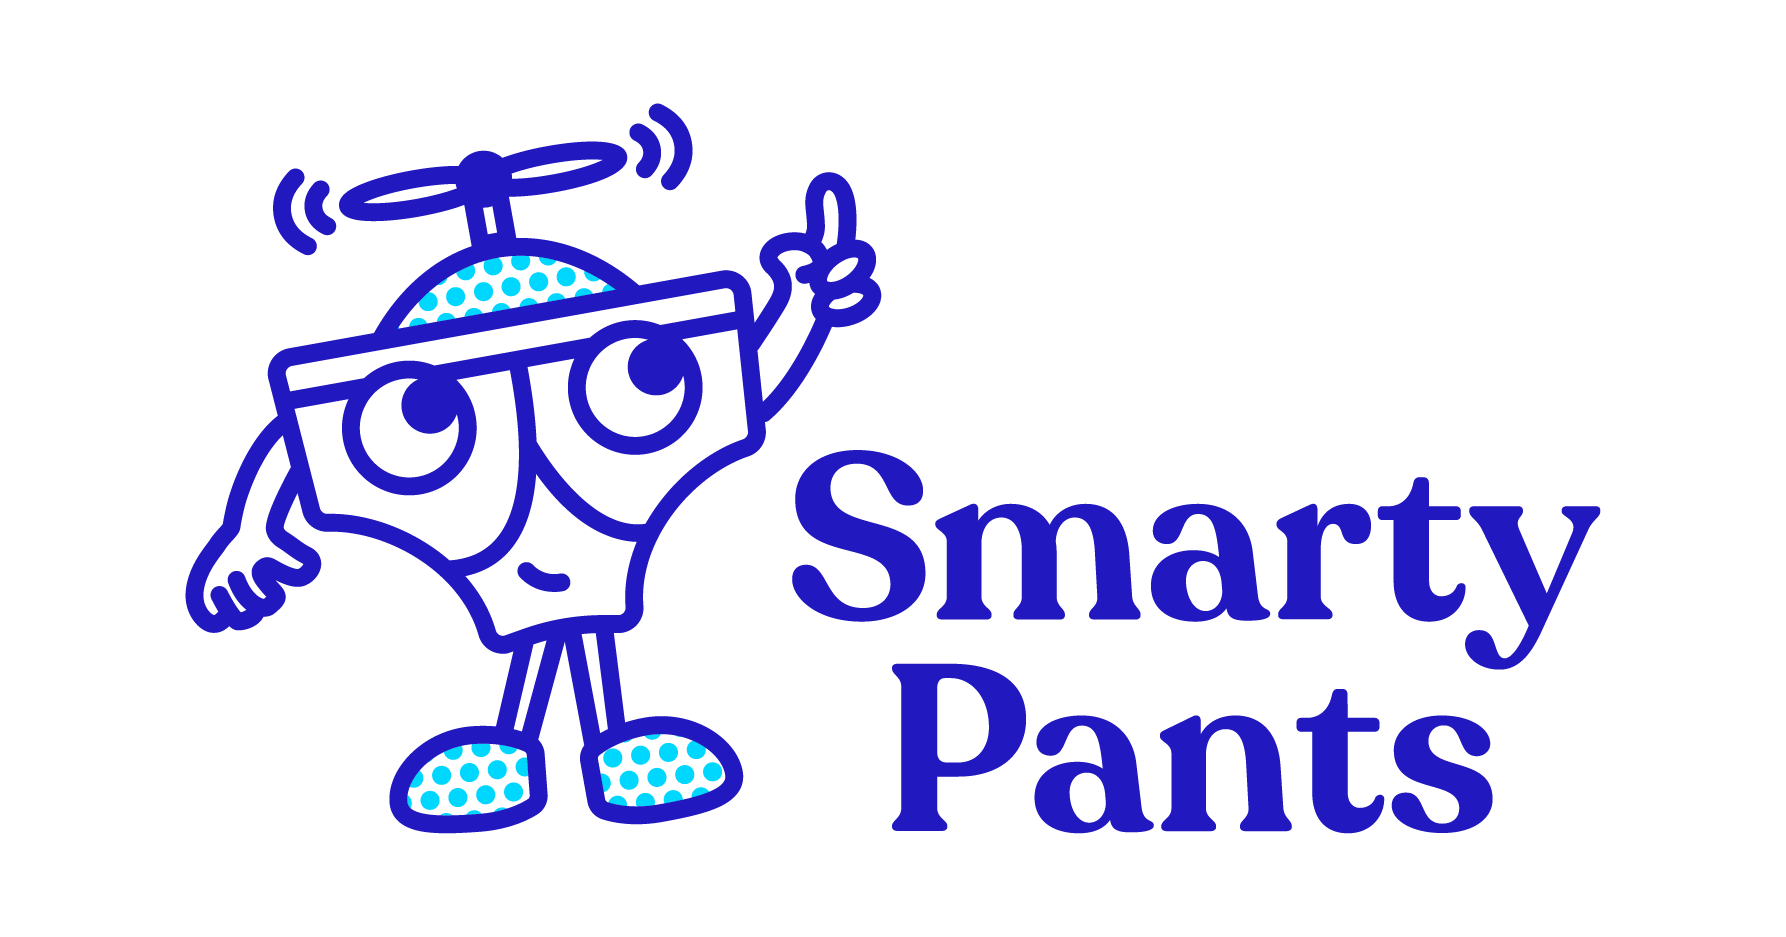 smarty pants template